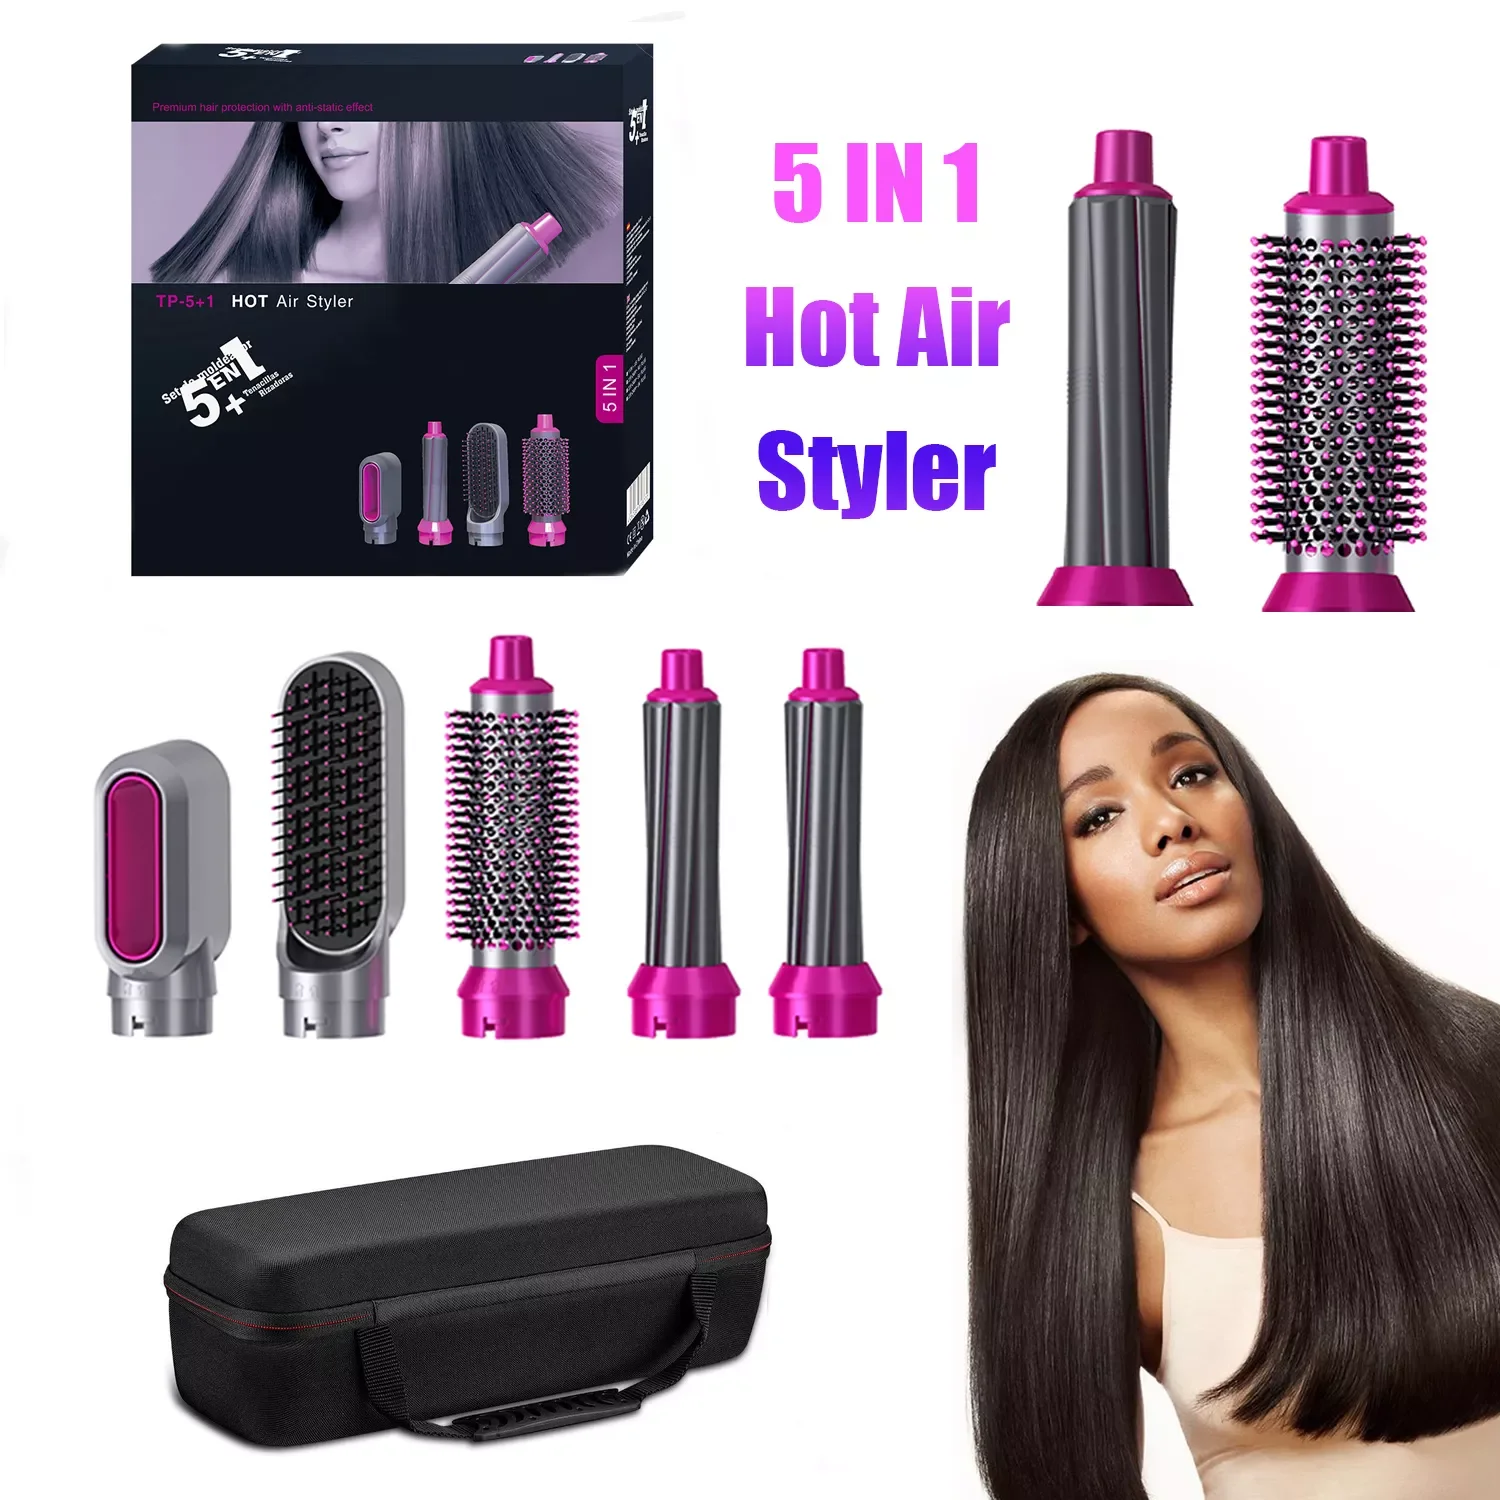 New in In 1  Hair Dryer Brush Hot Air Styler Blow Negative Ions Dryer Comb Hair Curler Straightening Curling Styling Tool free s